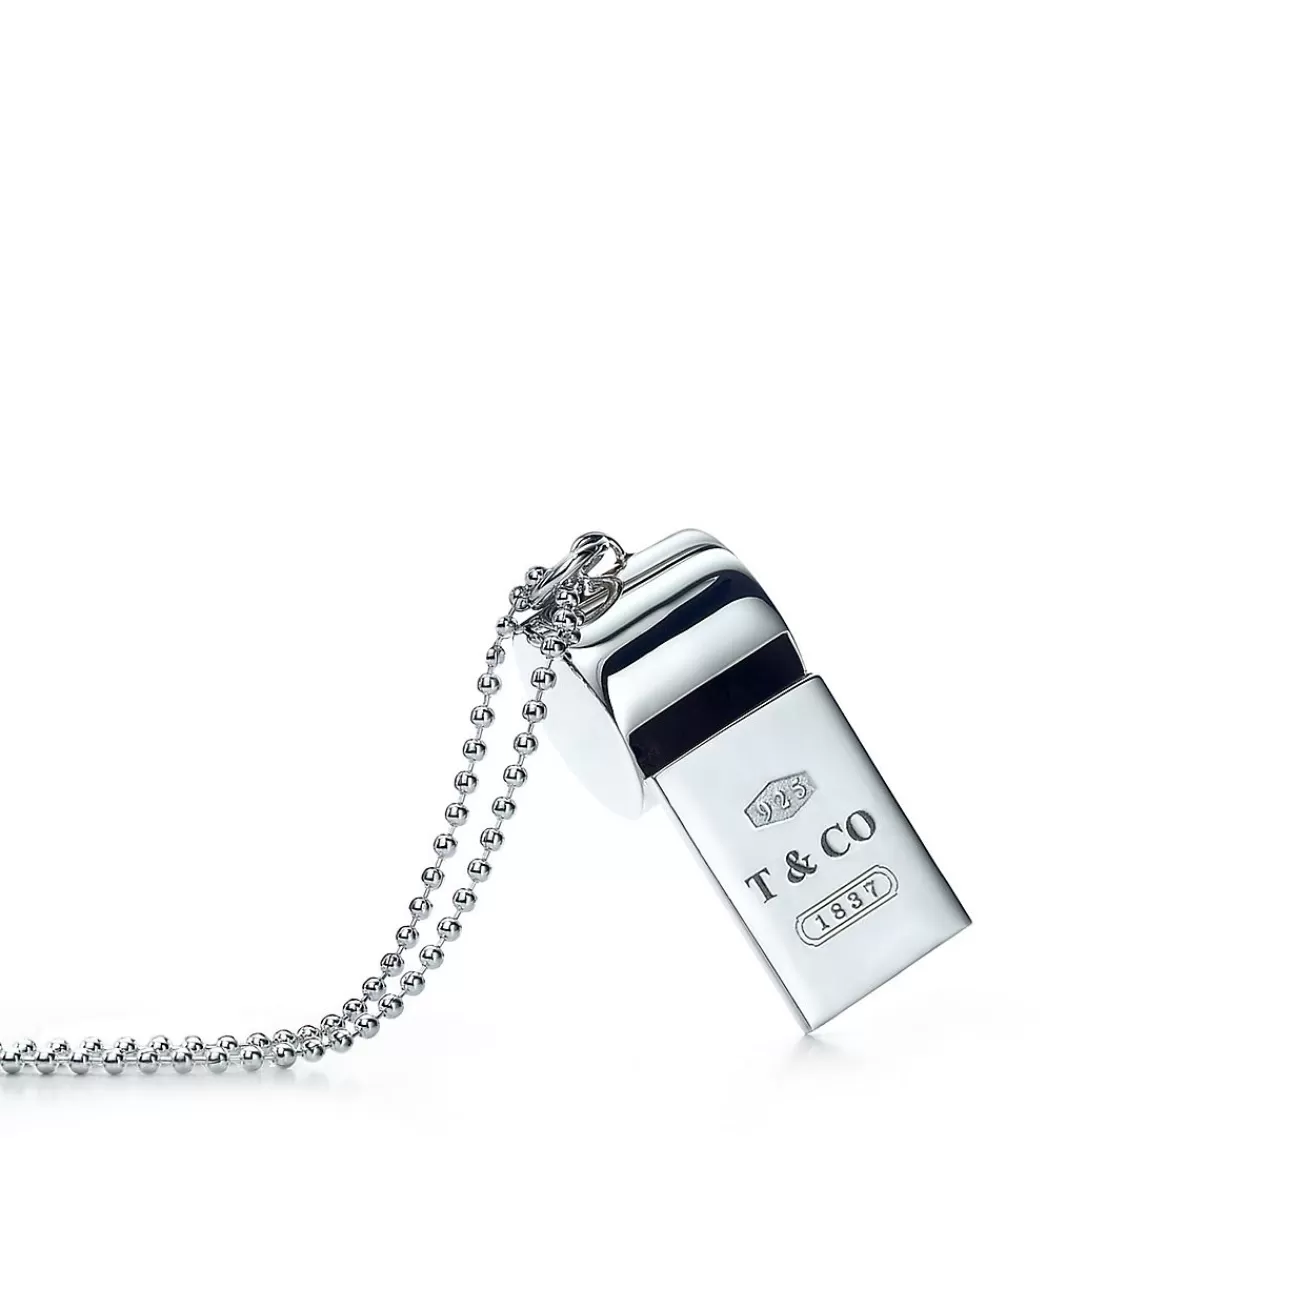 Tiffany & Co. Tiffany 1837® whistle in sterling silver on a beaded chain. | ^ Him | Gifts for Him